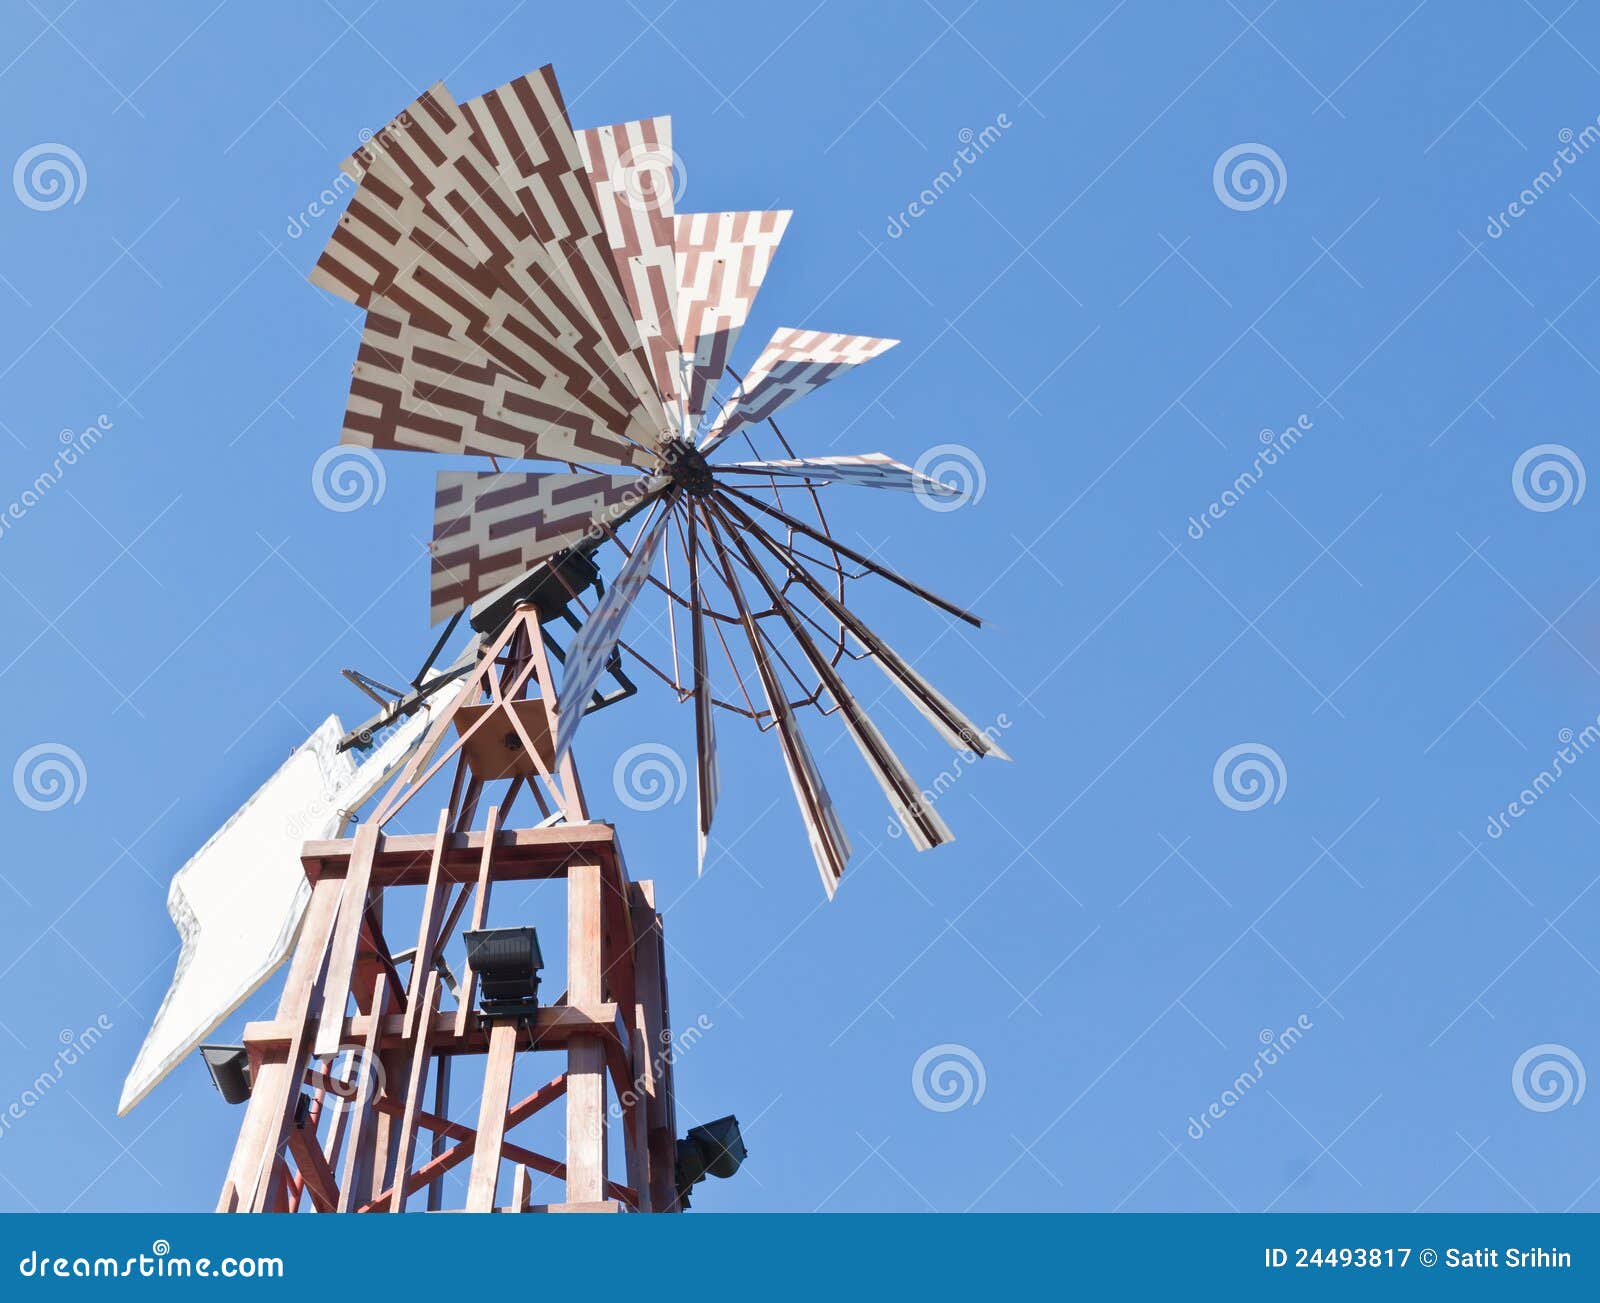 Wooden Windmill Tower Picture